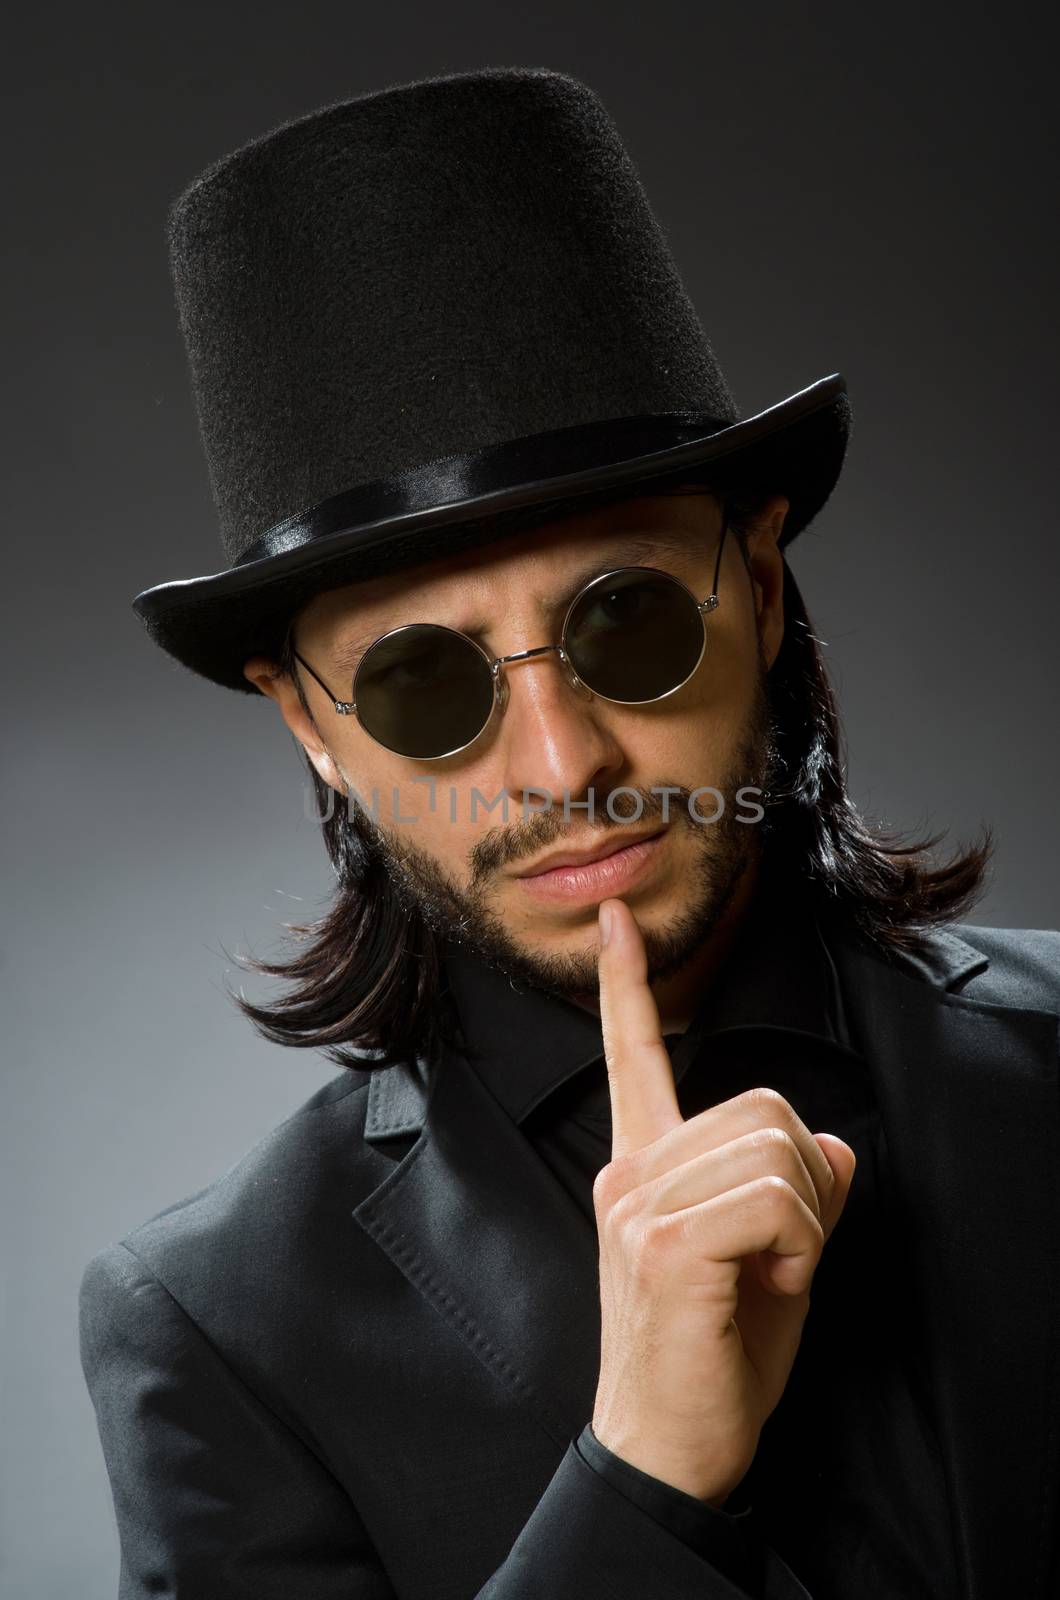 Vintage concept with man wearing black top hat